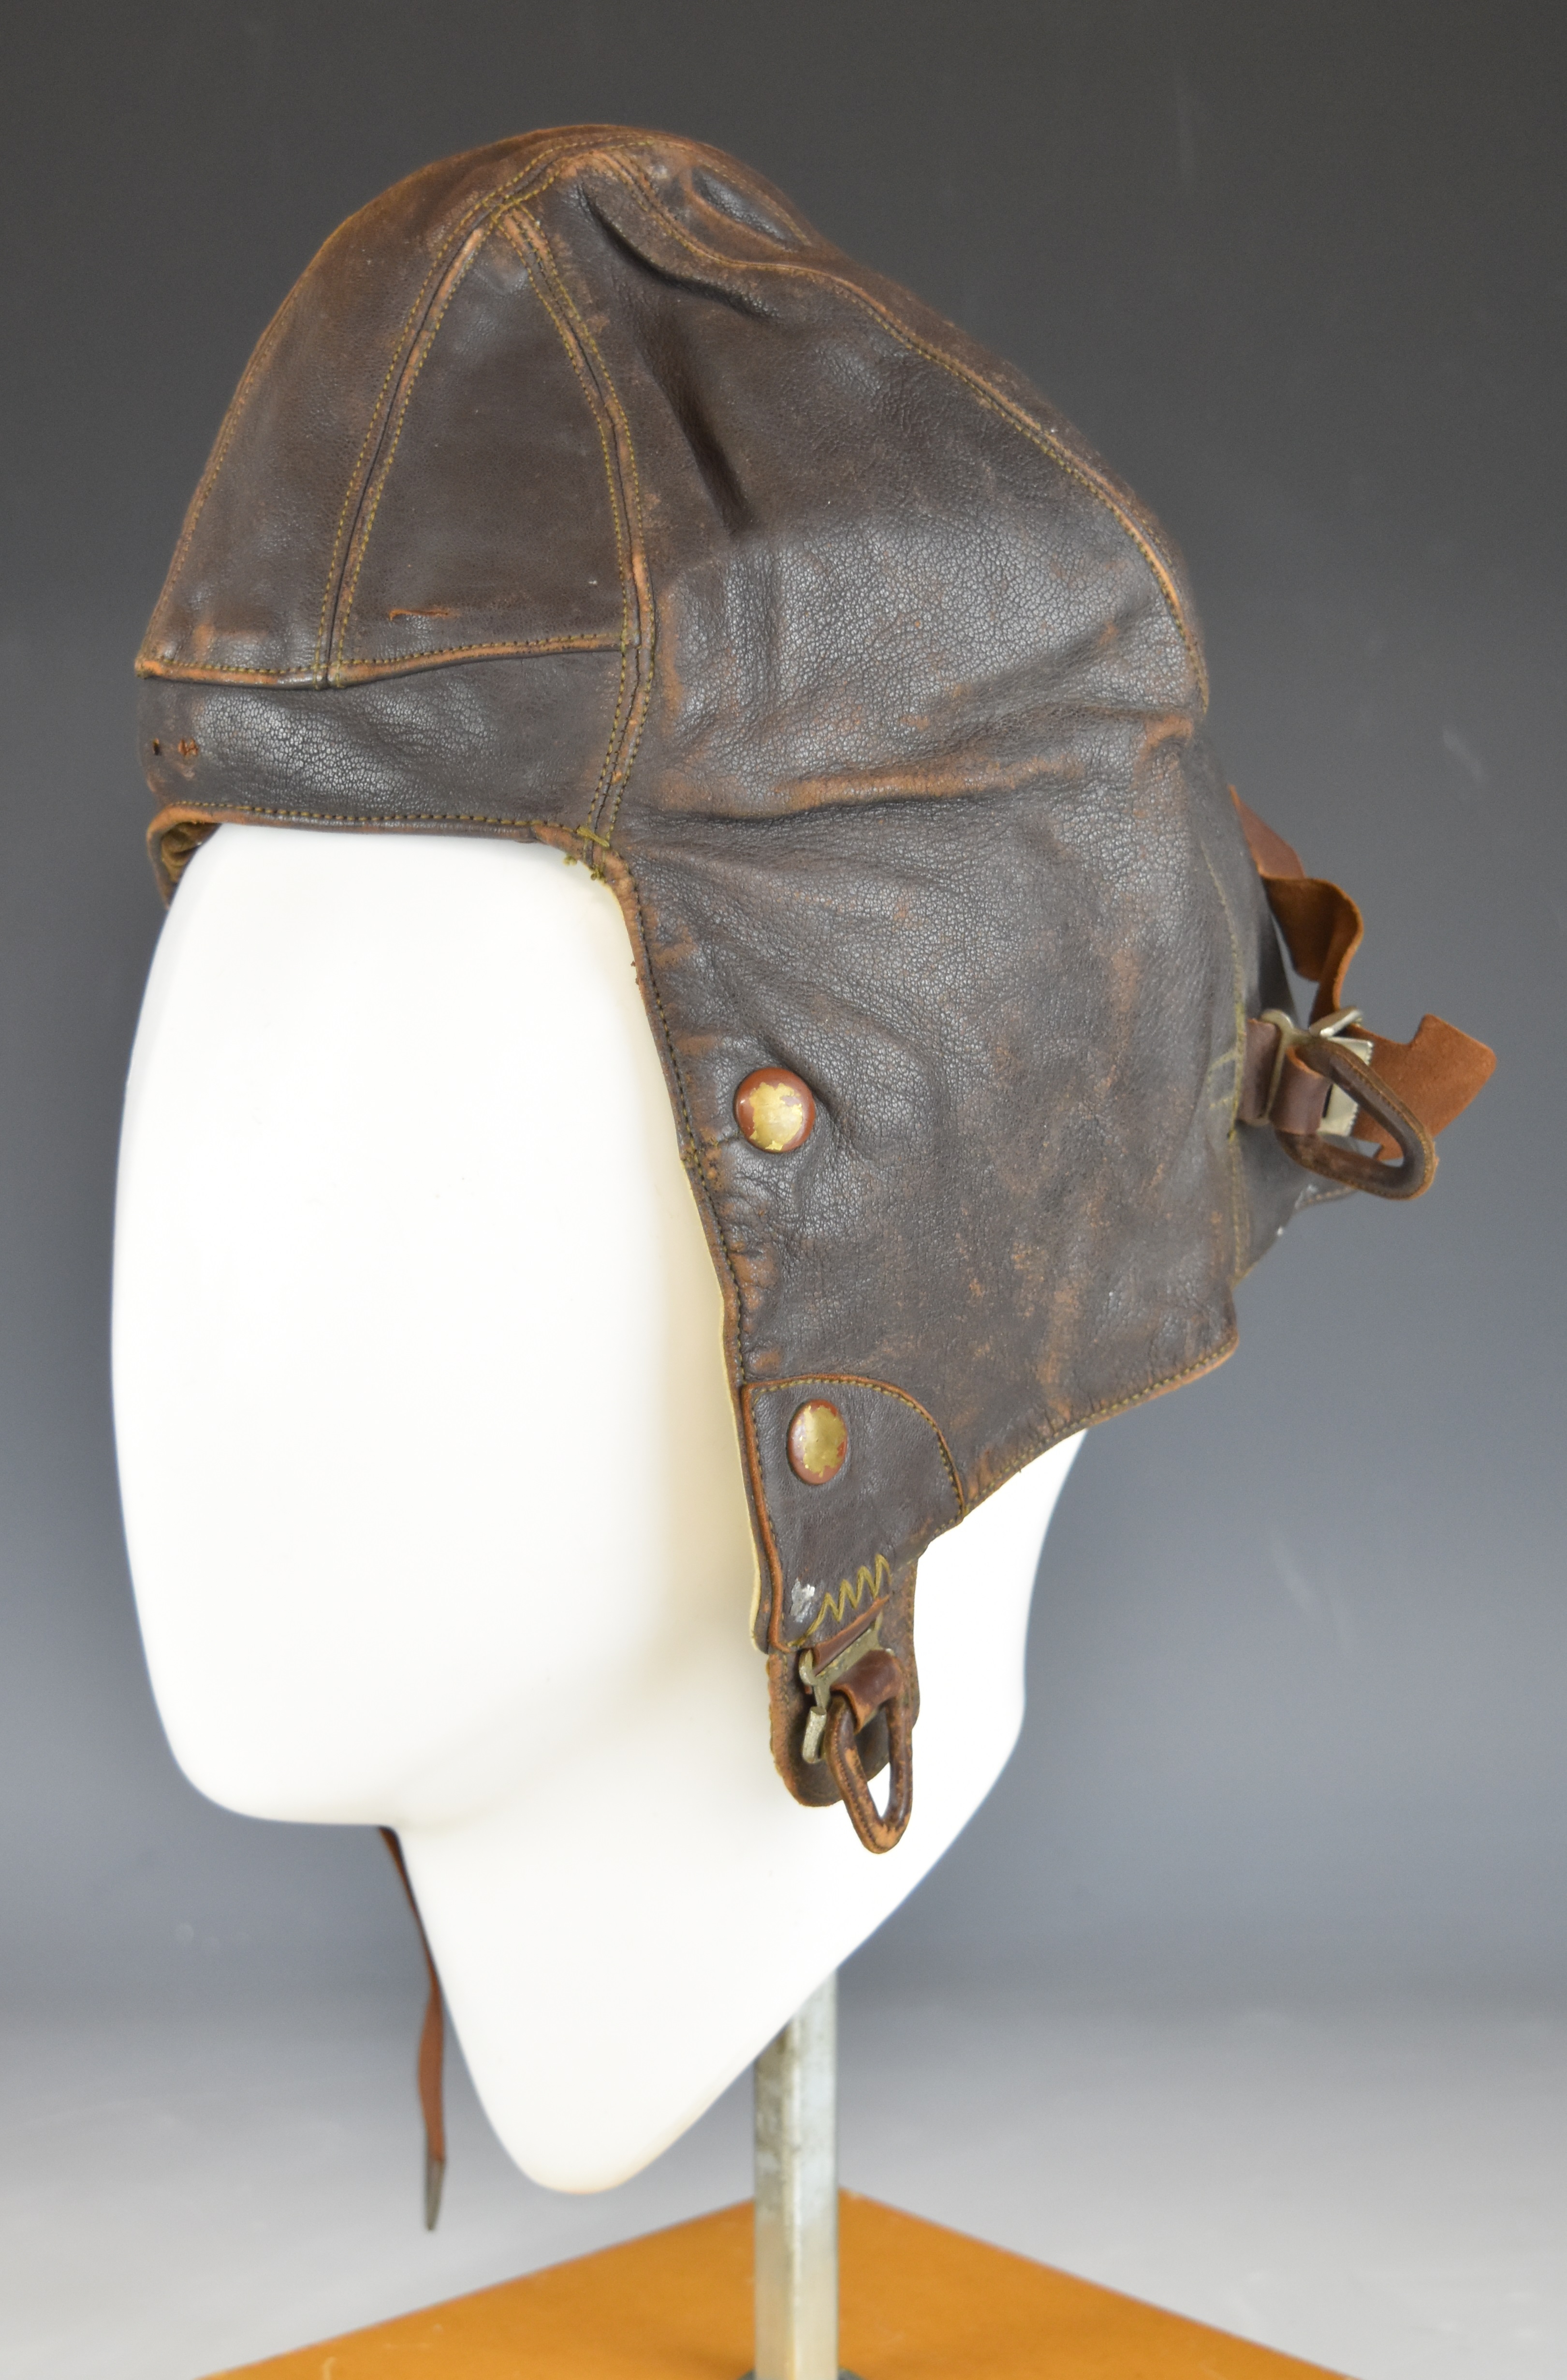 British WW2 leather flying helmet stamped AM 226/65 with label Wareings, Northampton, No 1, size